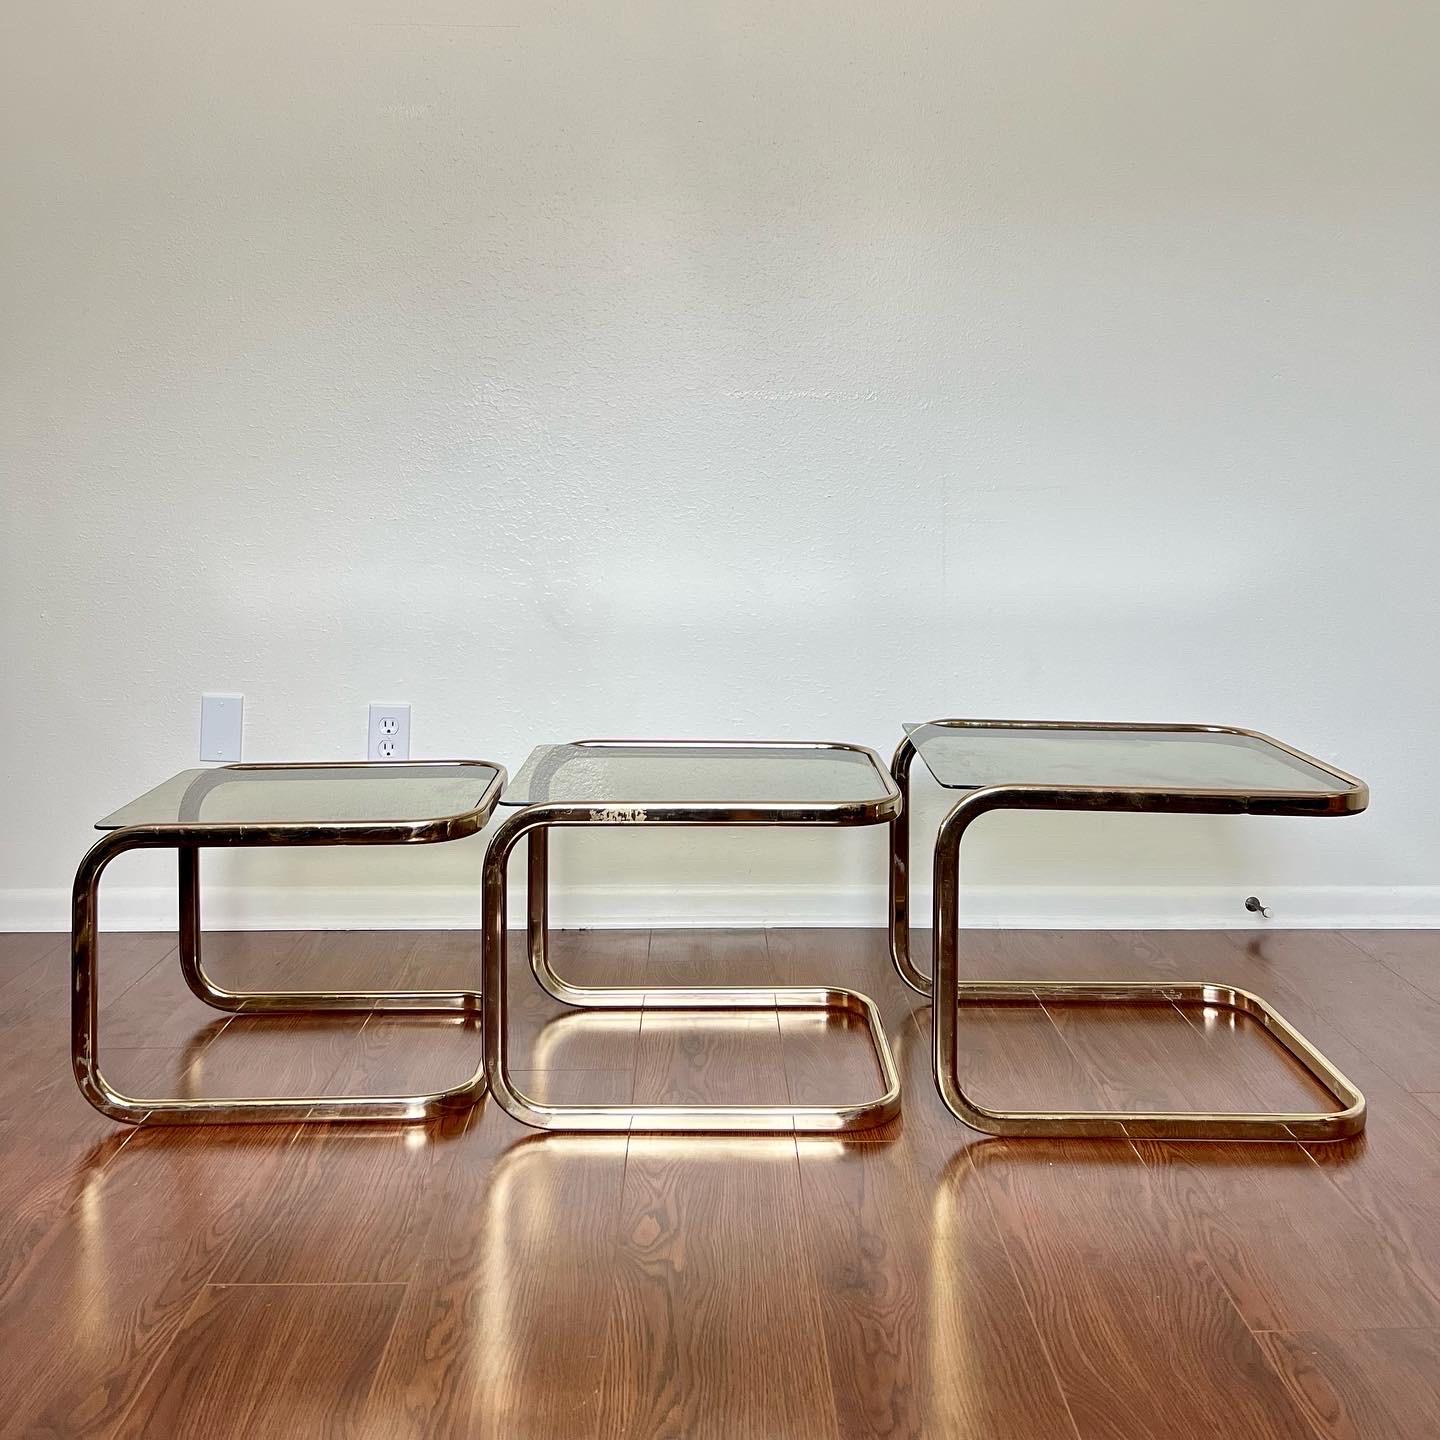 Striking Mid-Century Modern set of three brass and smoked glass nesting tables attributed to Milo Baughman for DIA. Constructed from brass plated steel with smooth, sleek frames and each featuring a plate of dark tinted glass. In good condition. No